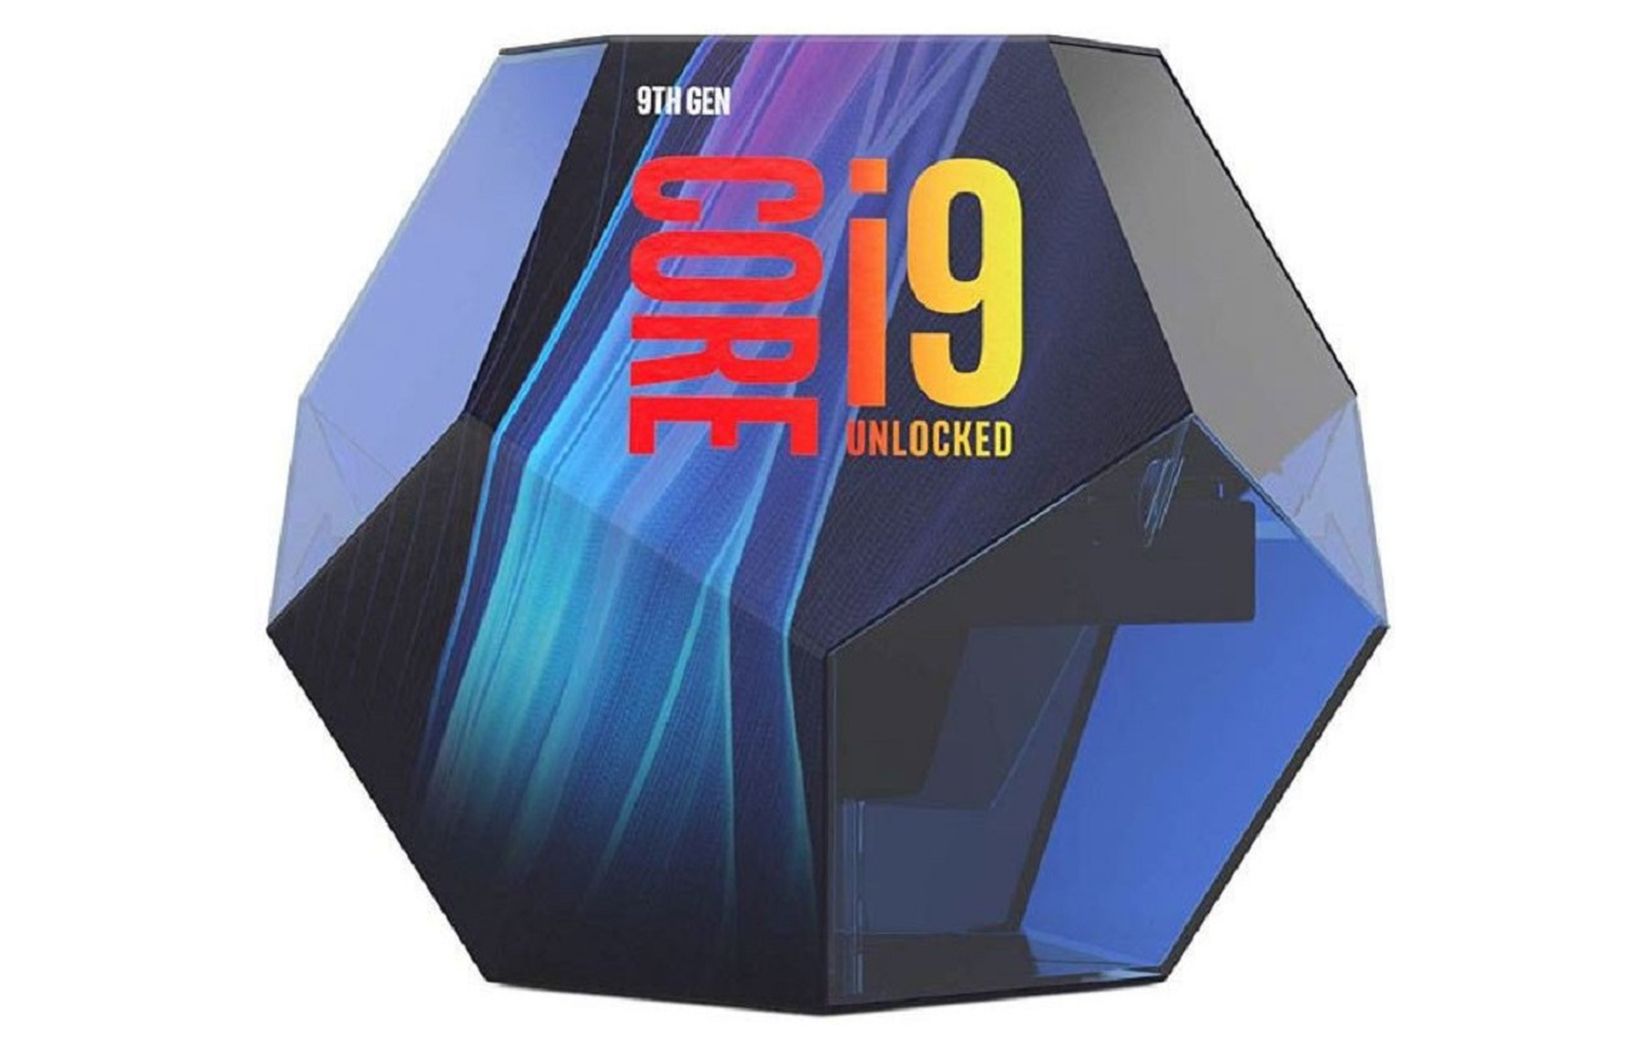 Intel discontinues premium packaging design for Core i9-12900K and